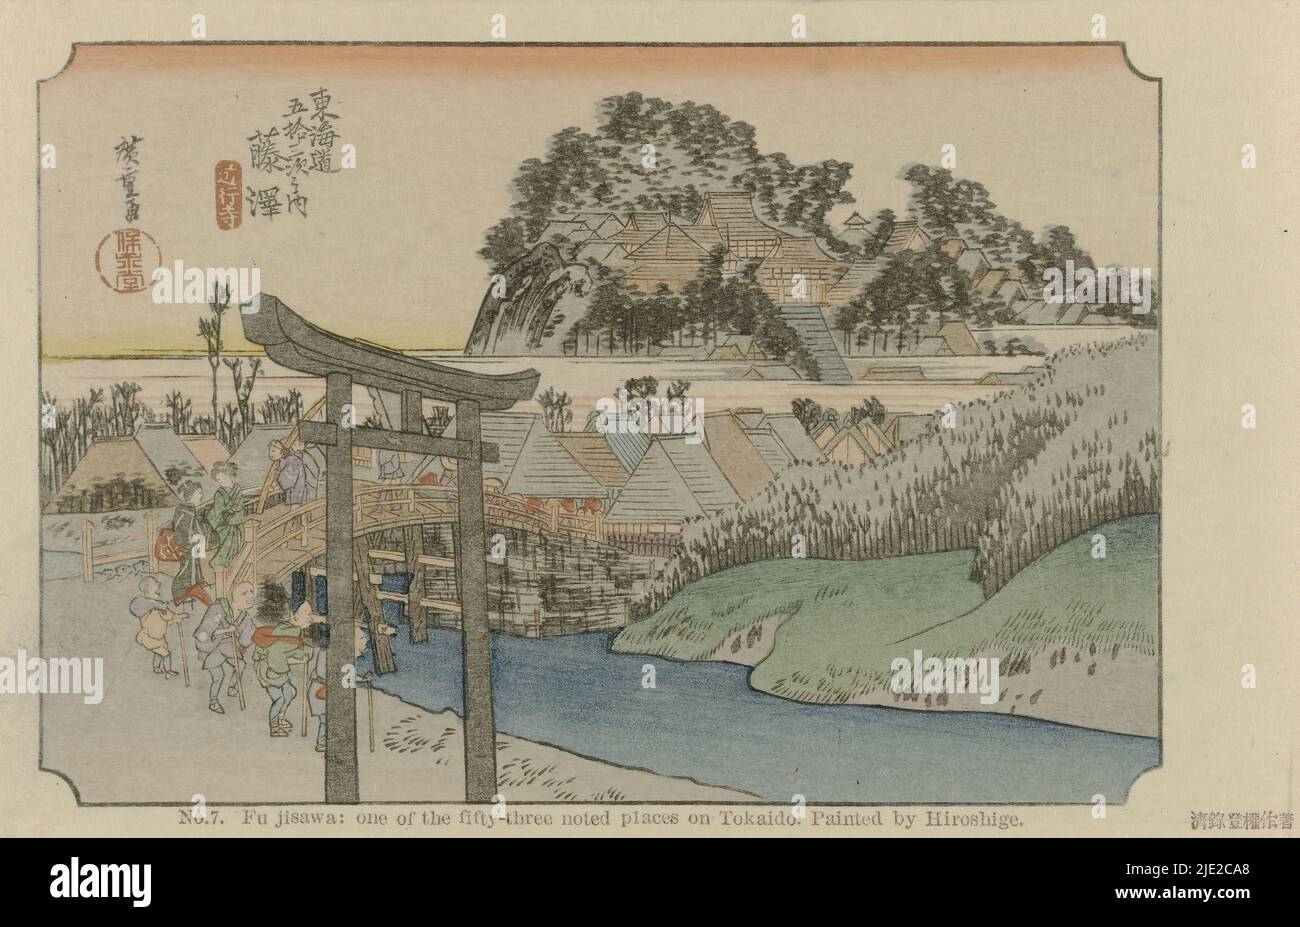 Fujisawa, No. 7. Fujisawa: one of the fifty-three noted places on Tokaido. Painted by Hiroshige (title on object), The Tôkaidô of Hiroshige (series title), Hiroshige no fude Tôkaidô (series title on object), Travelers walk across a small bridge toward a village, in the foreground an entrance gate (torii)., after print by: Hiroshige (I) , Utagawa, (mentioned on object), publisher: Fujisawa Bunjirô, (mentioned on object), Japan, 1906, cardboard, color woodcut, height 90 mm × width 141 mm Stock Photo